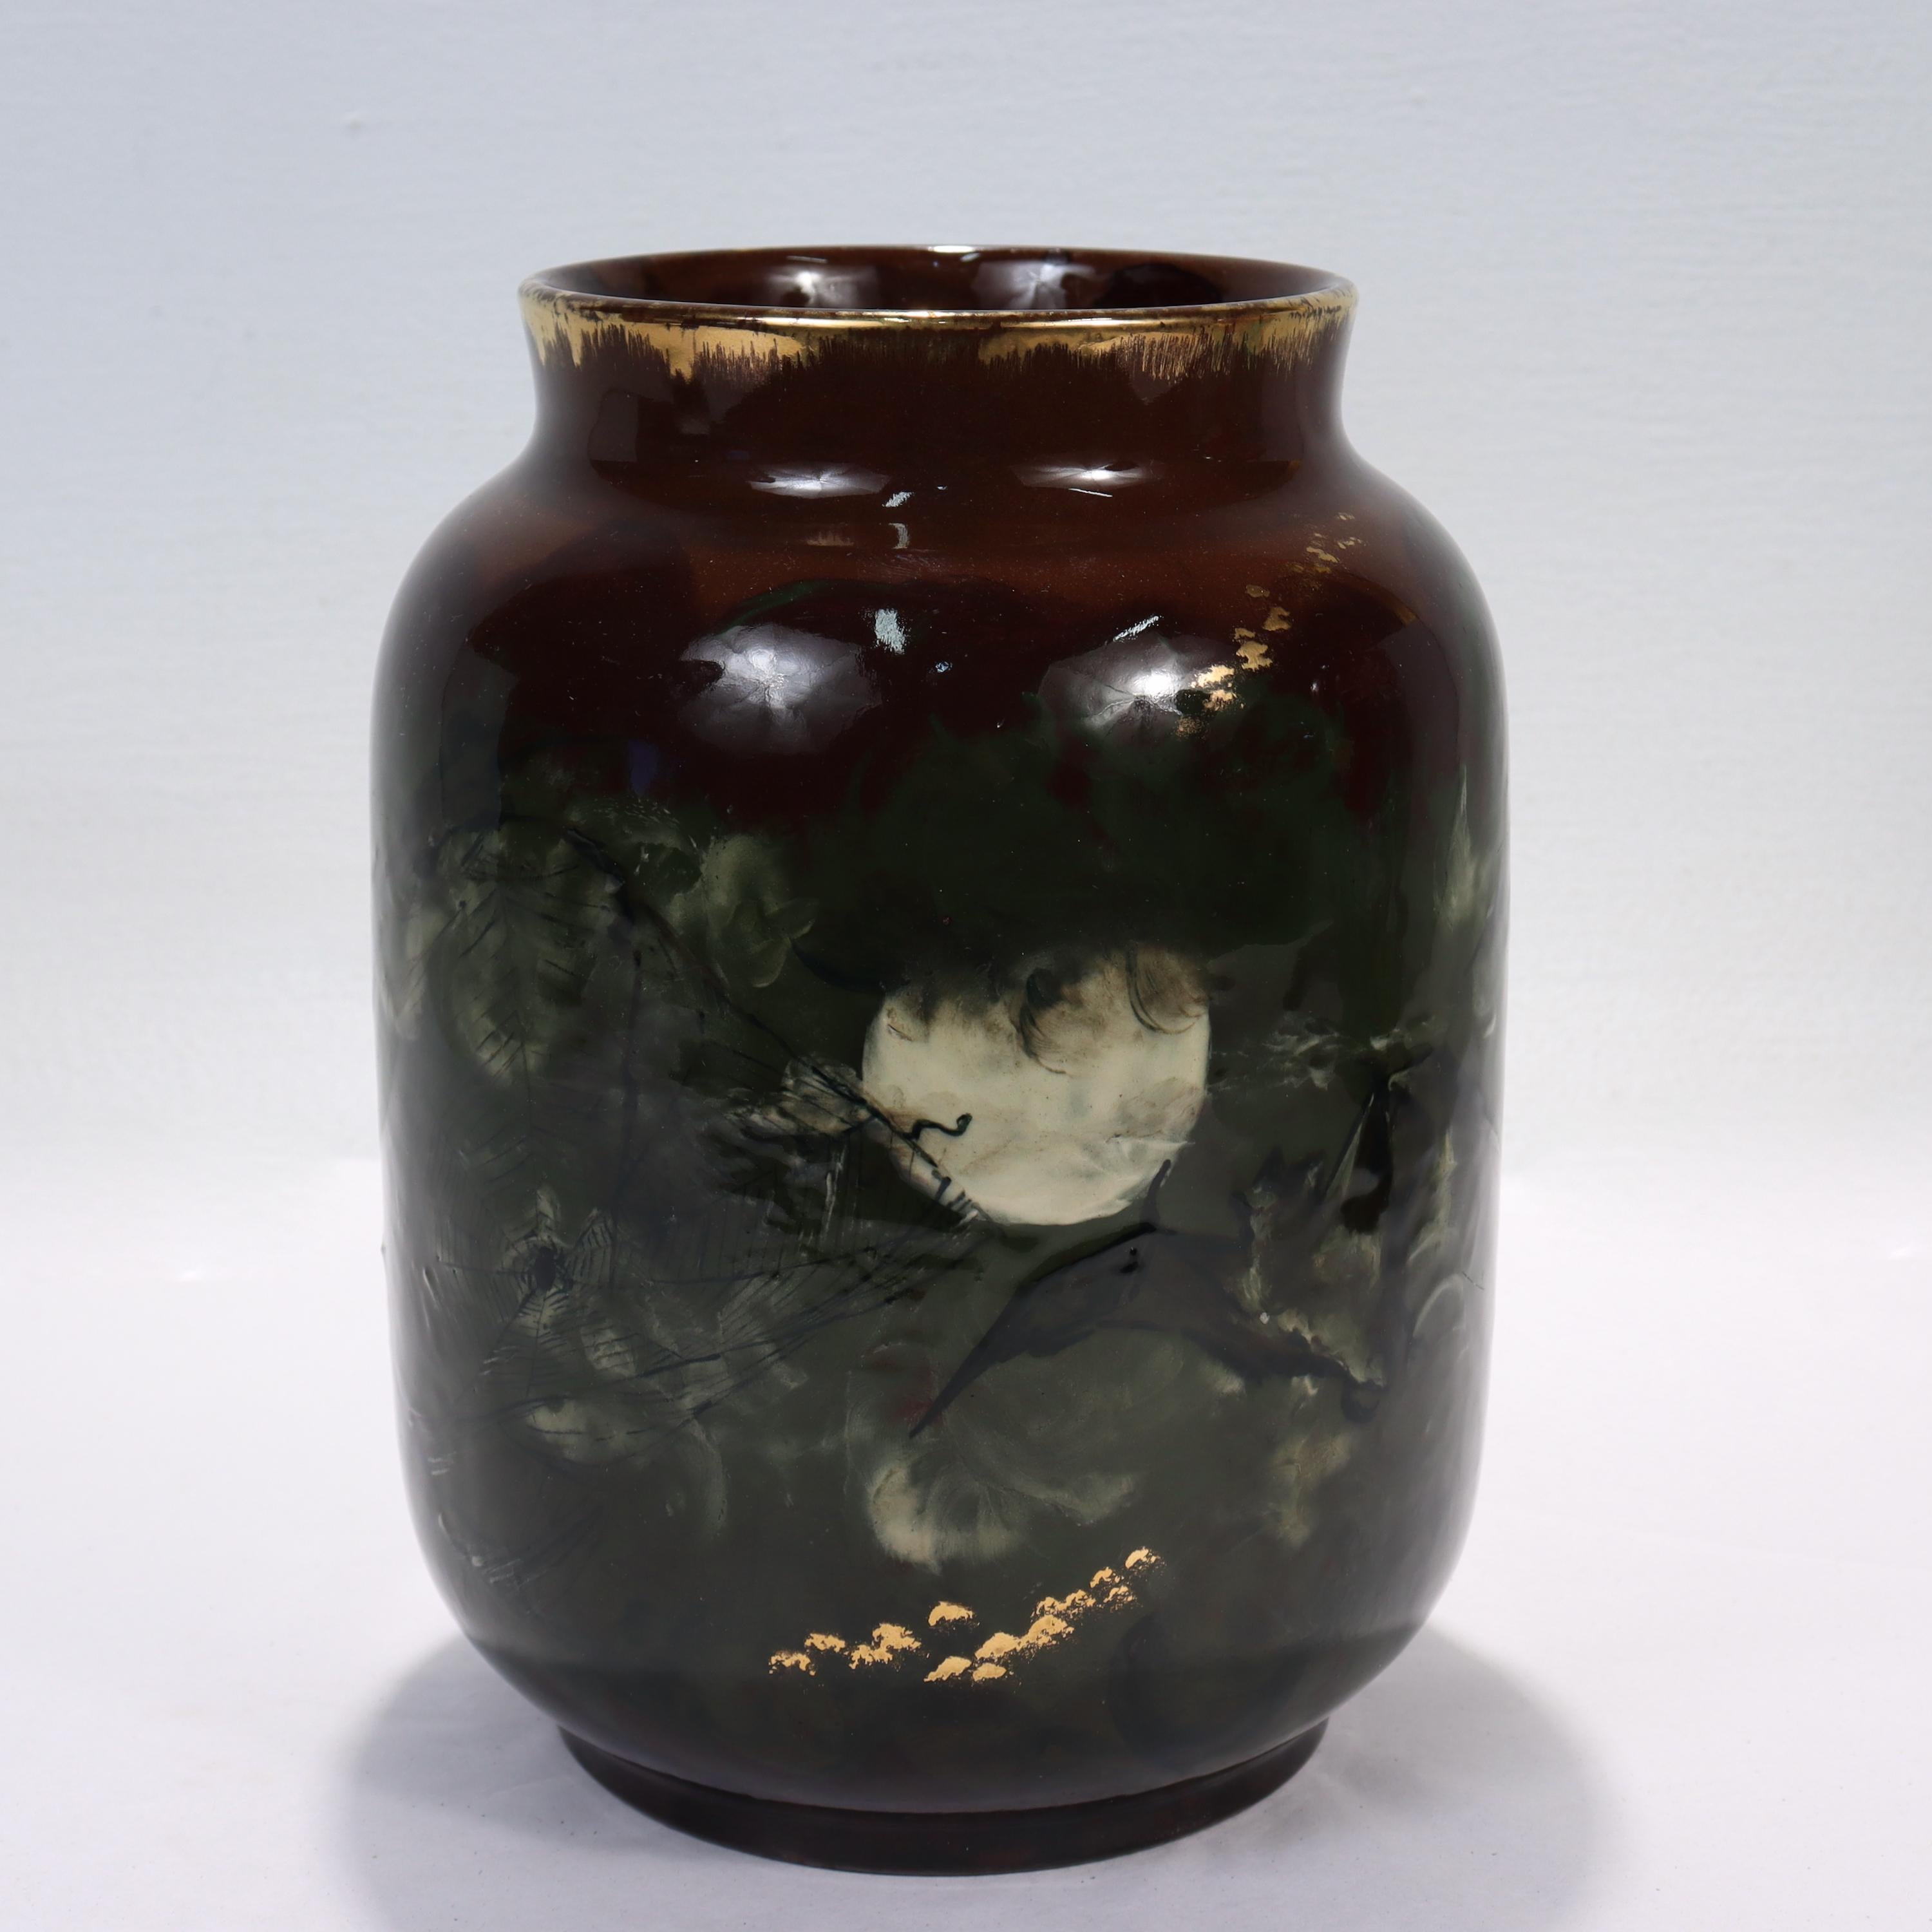 A fine antique Aesthetic Period Rookwood pottery vase.

Decorated with a spider on its web under the moon, bats, & clouds on a brown ground with gilt highlights with a Limoges glaze.

By Albert R. Valentin.

Fully marked and signed in mongram